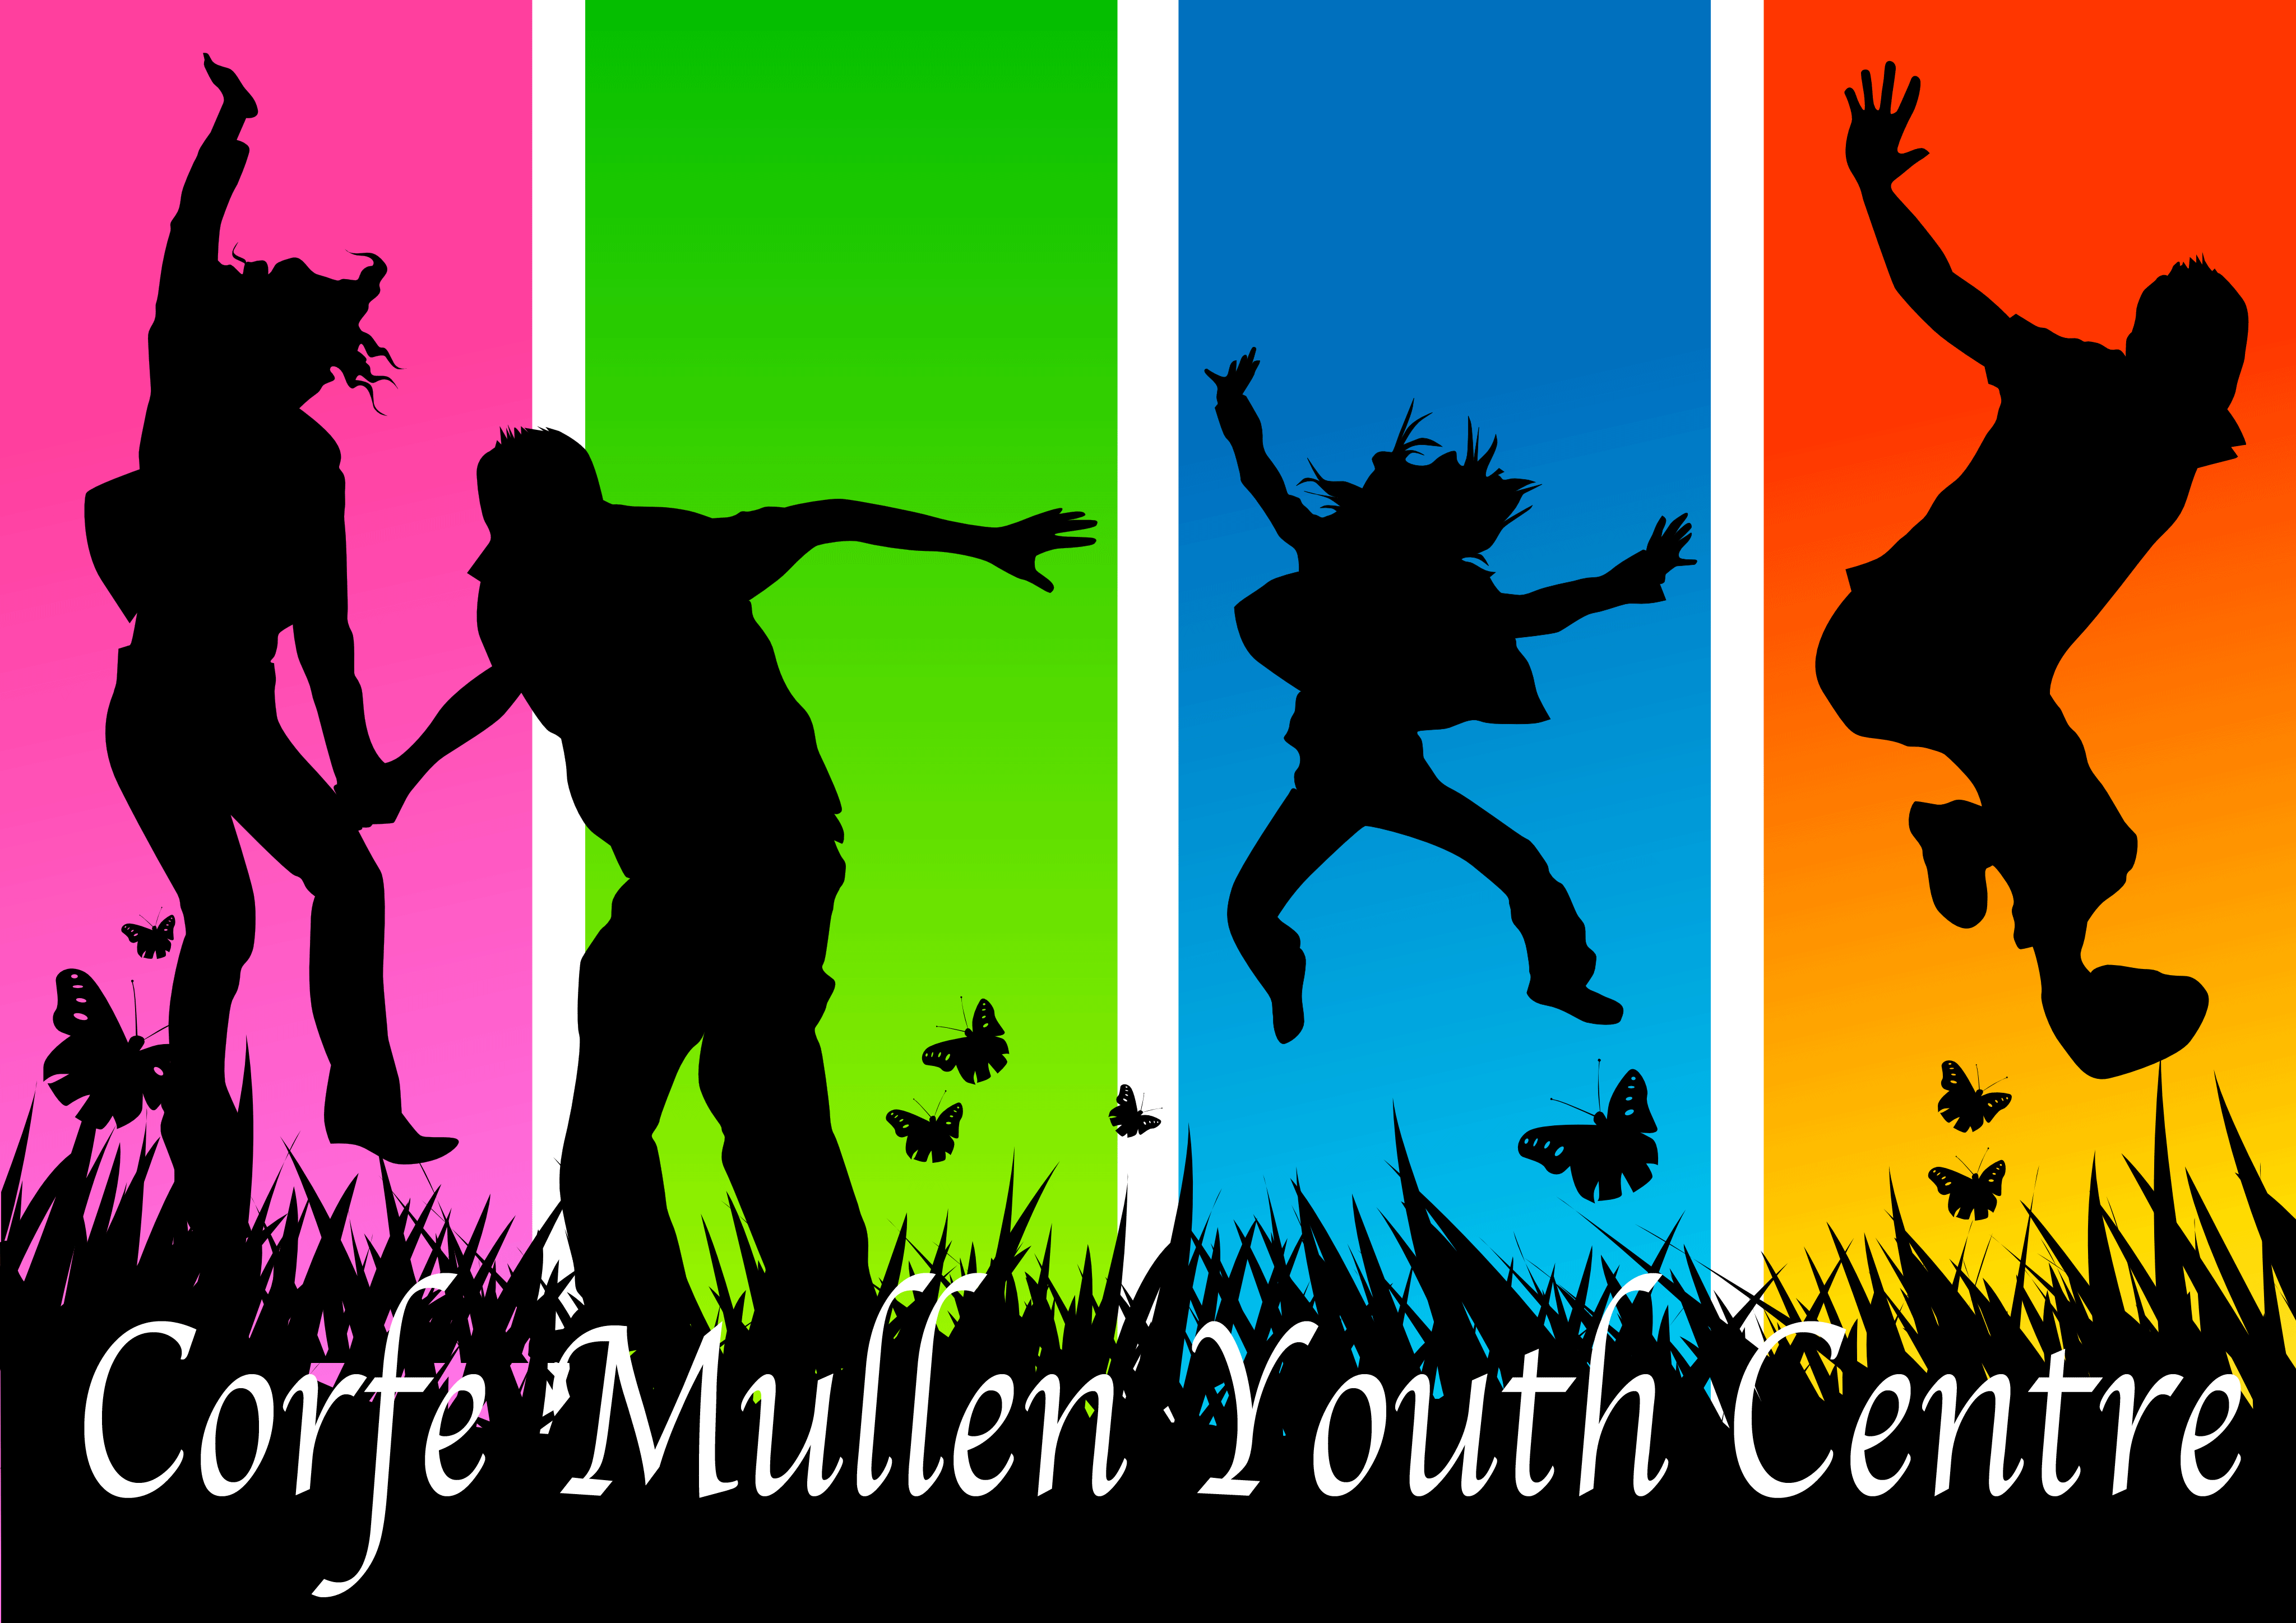 Corfe Mullen Youth Centre